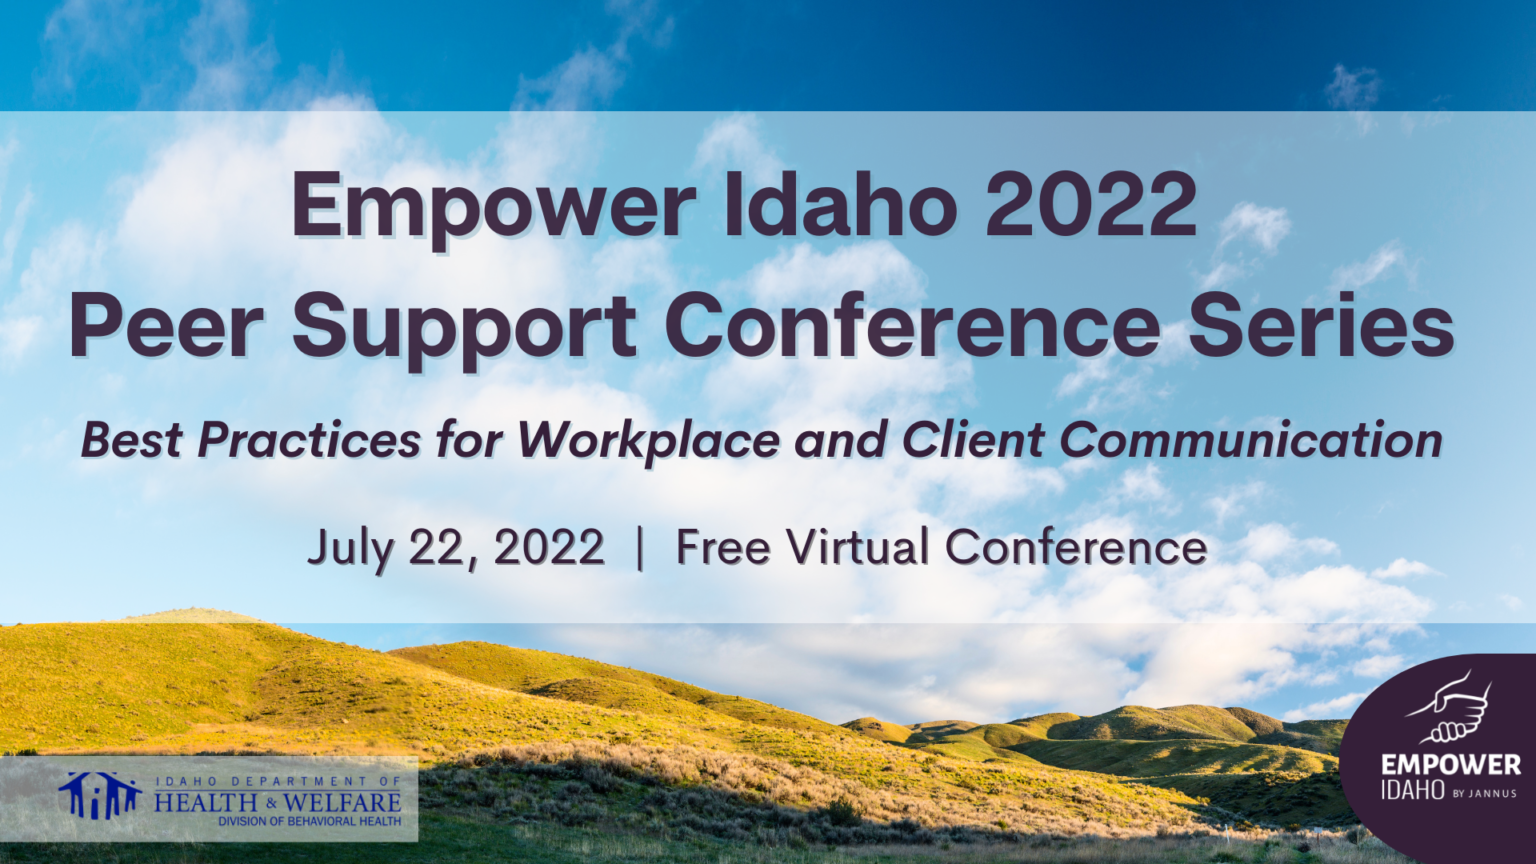 Empower Idaho Event Empower Idaho 2022 Peer Support Conference Series